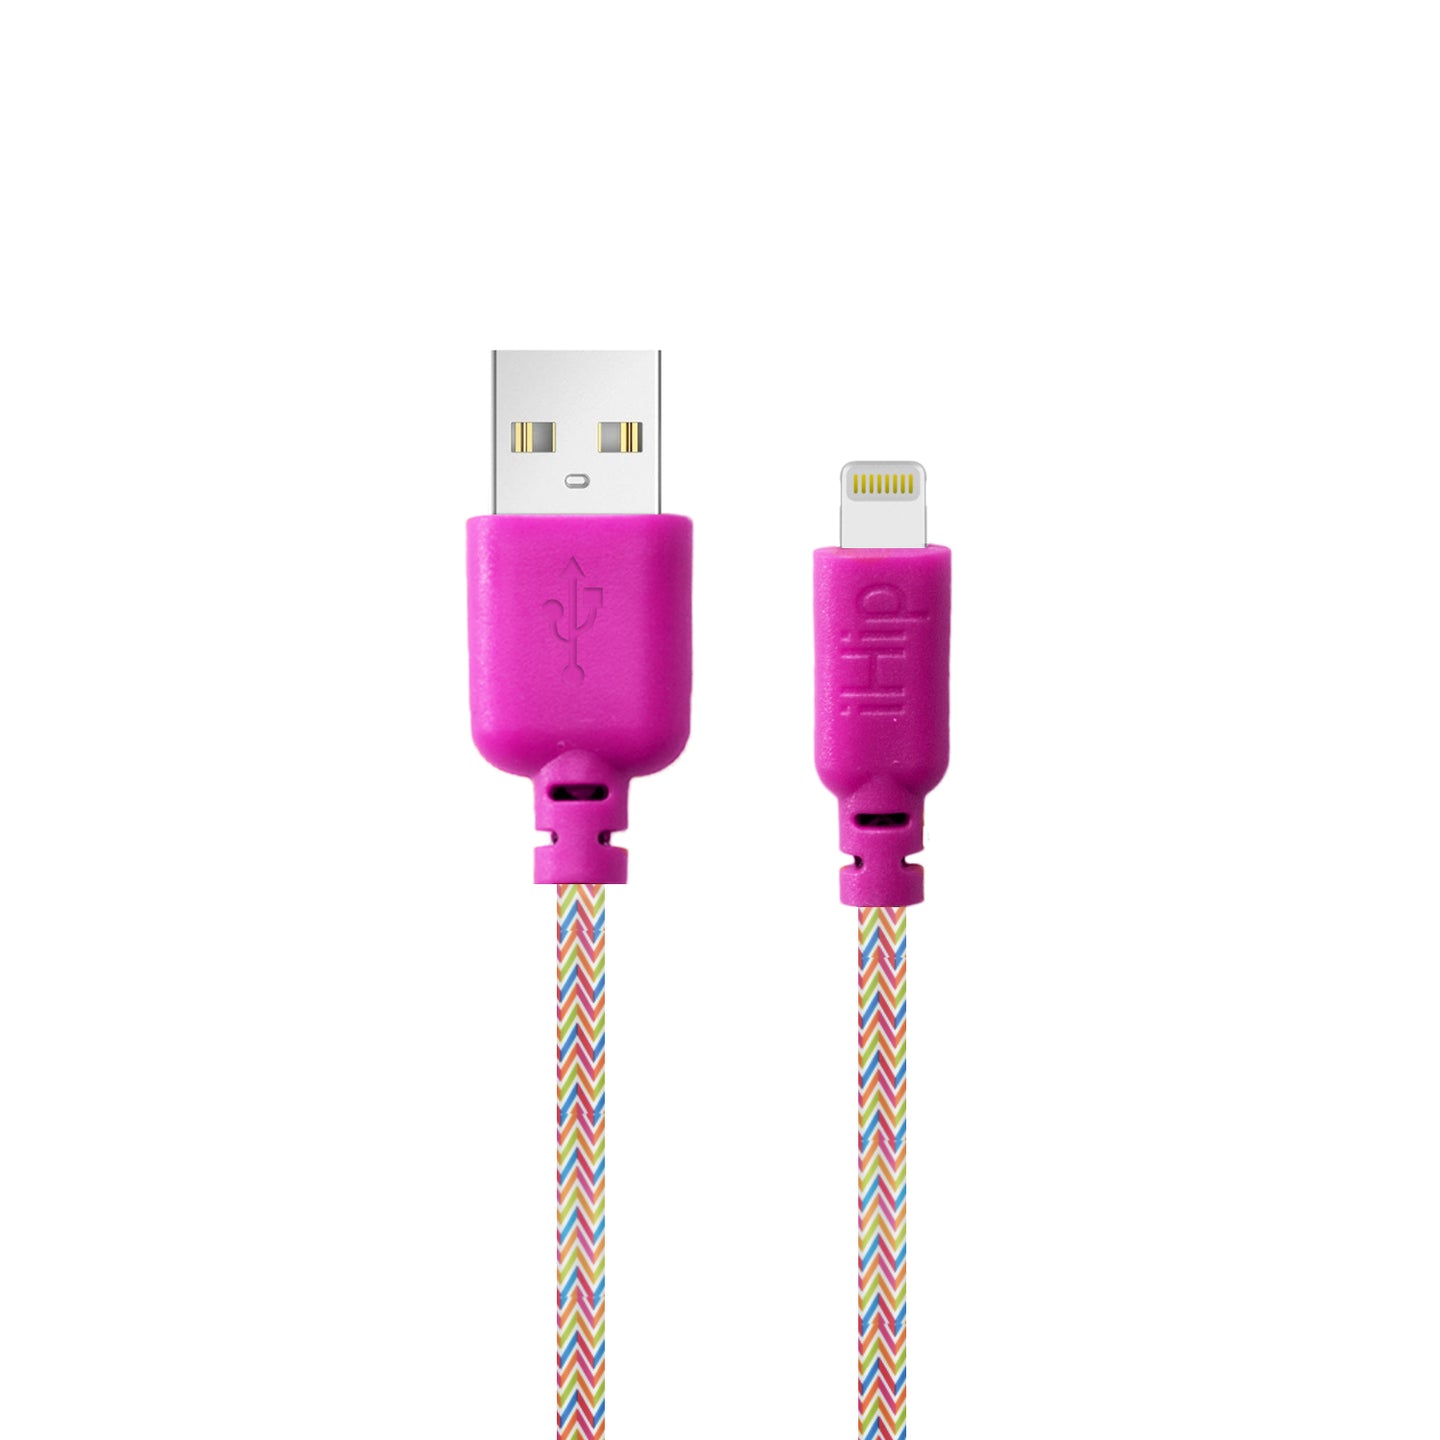 iHip Cute Cords 6ft  Rainbow Braided MFI Lighting USB Sync Cable Bend Test Certified - iPhone Charger Cable for iPhone/ iPad /iPod - iHip